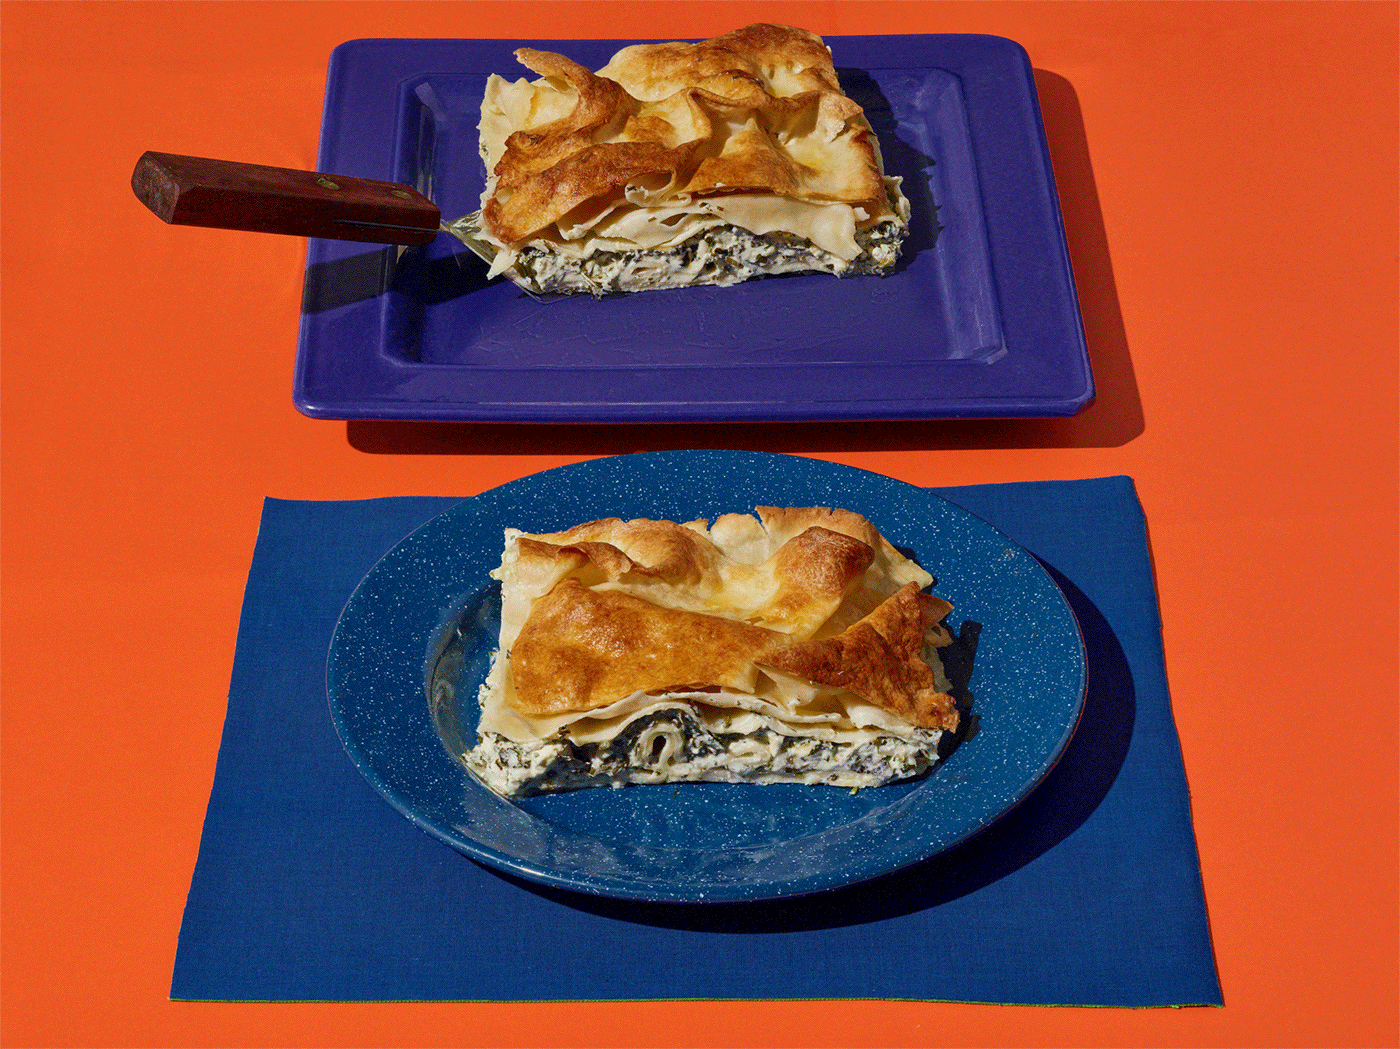 Slices of water borek on blue plates